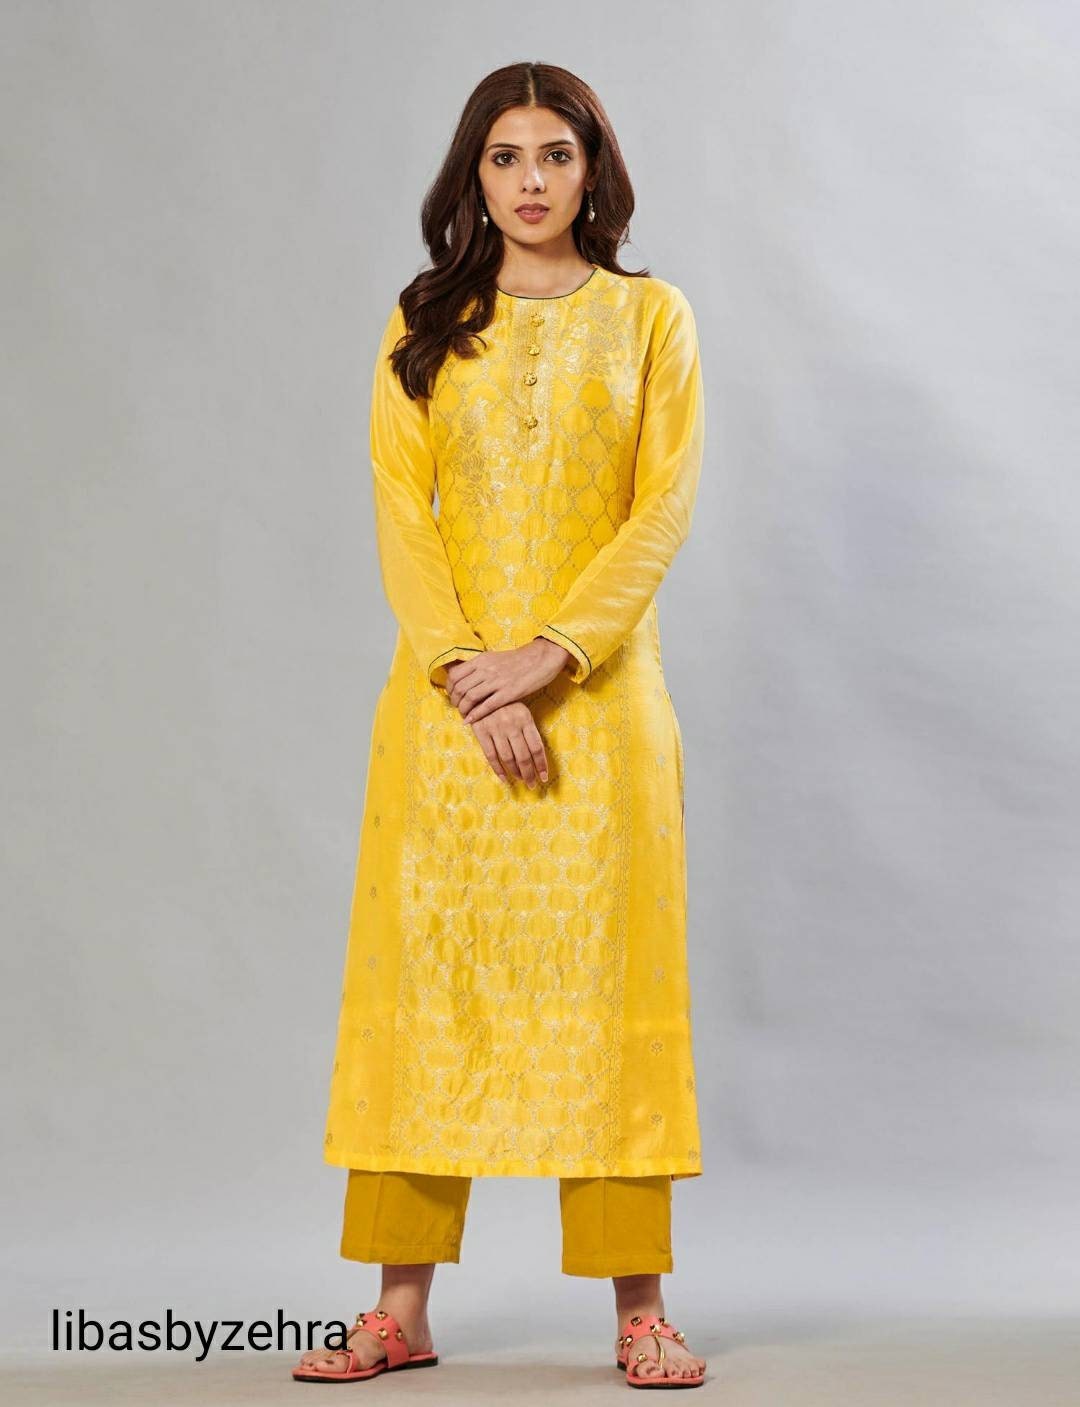 Latest #Yellow Dresses Designs For Girls||#Yellow #Kurti Designs 2020||Yellow  Colour Dress Designs - YouTube